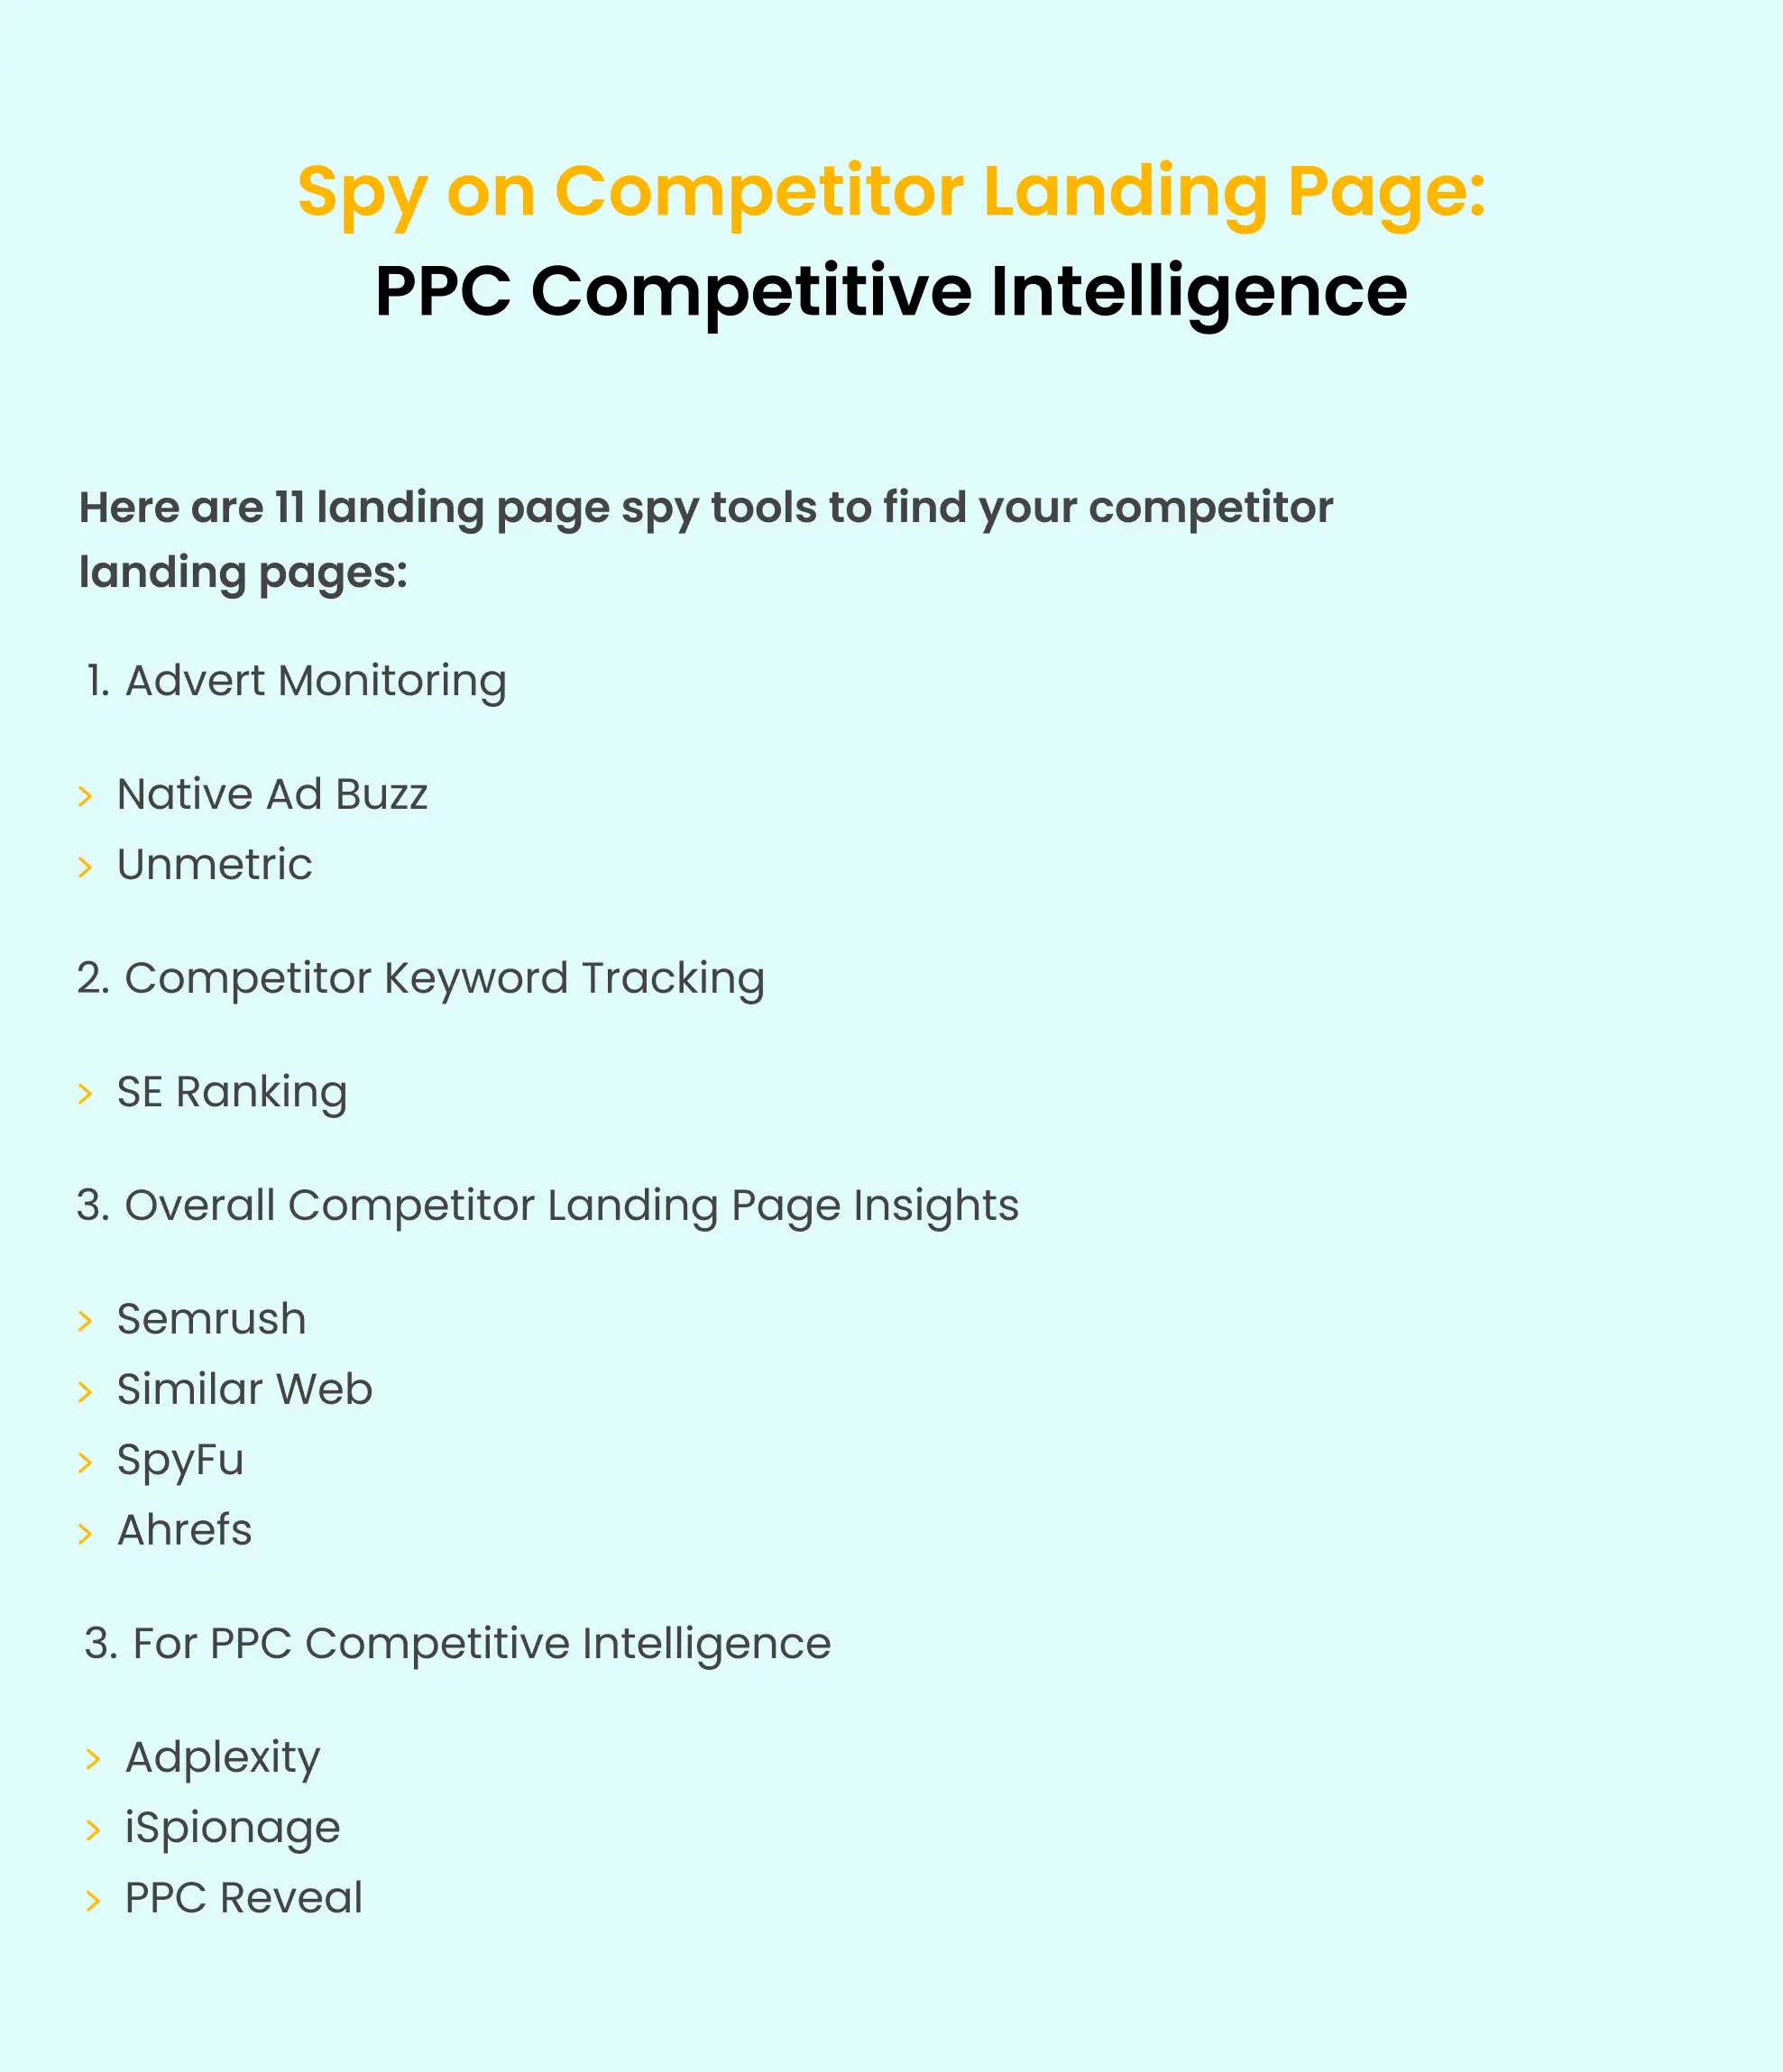 spy-on-competitor-landing-pages-summary.webp